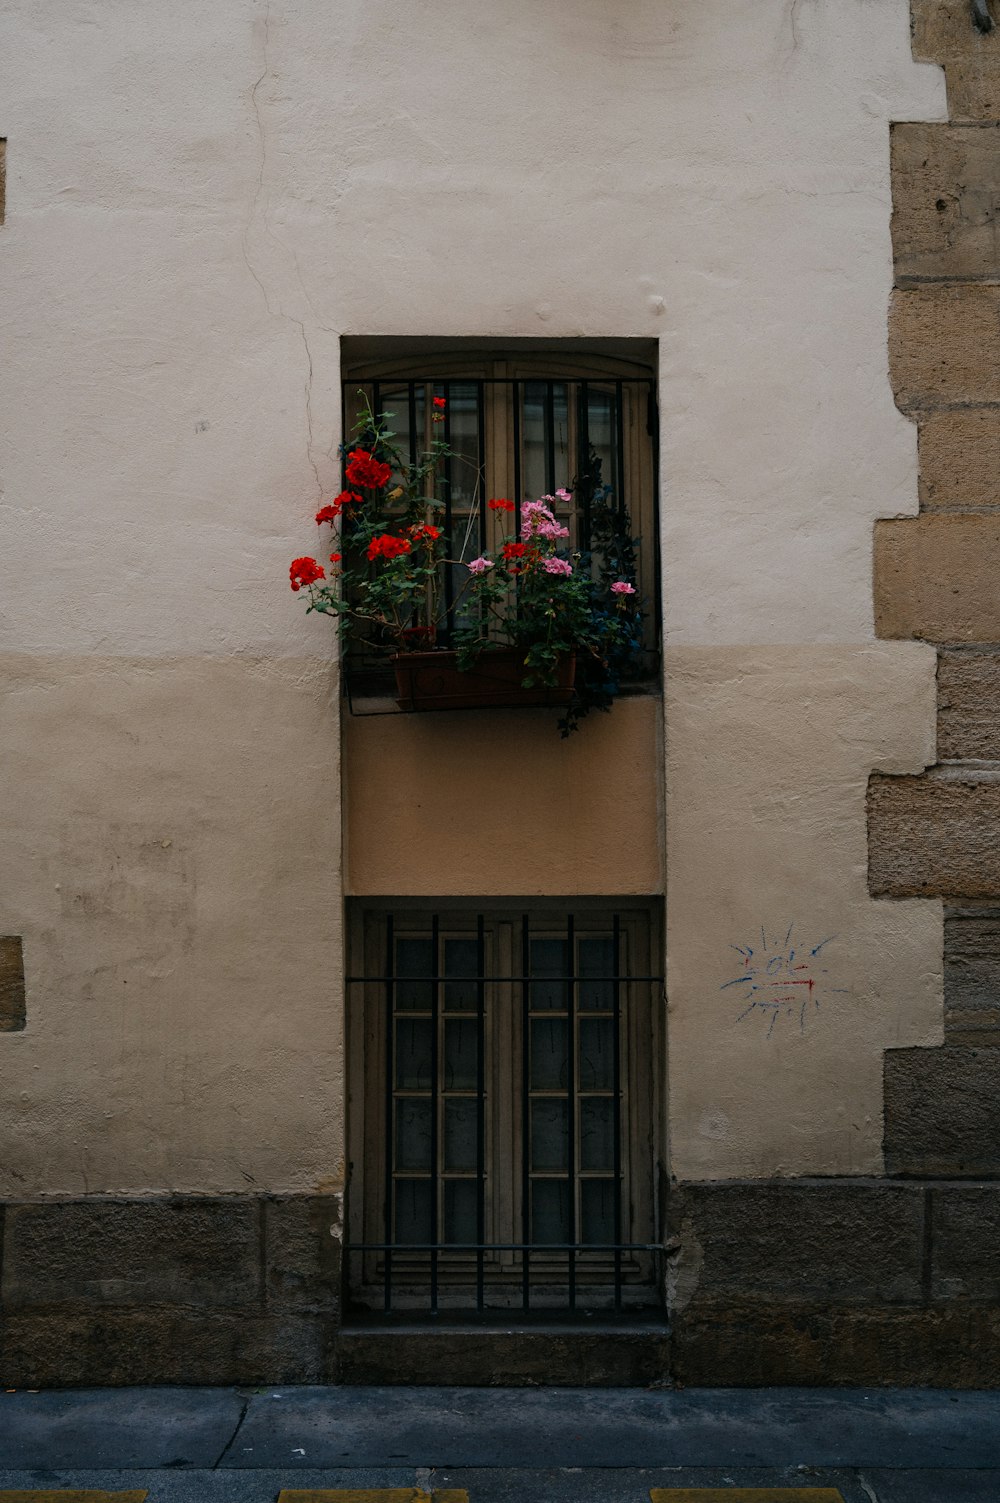 a building with a window and a planter with flowers